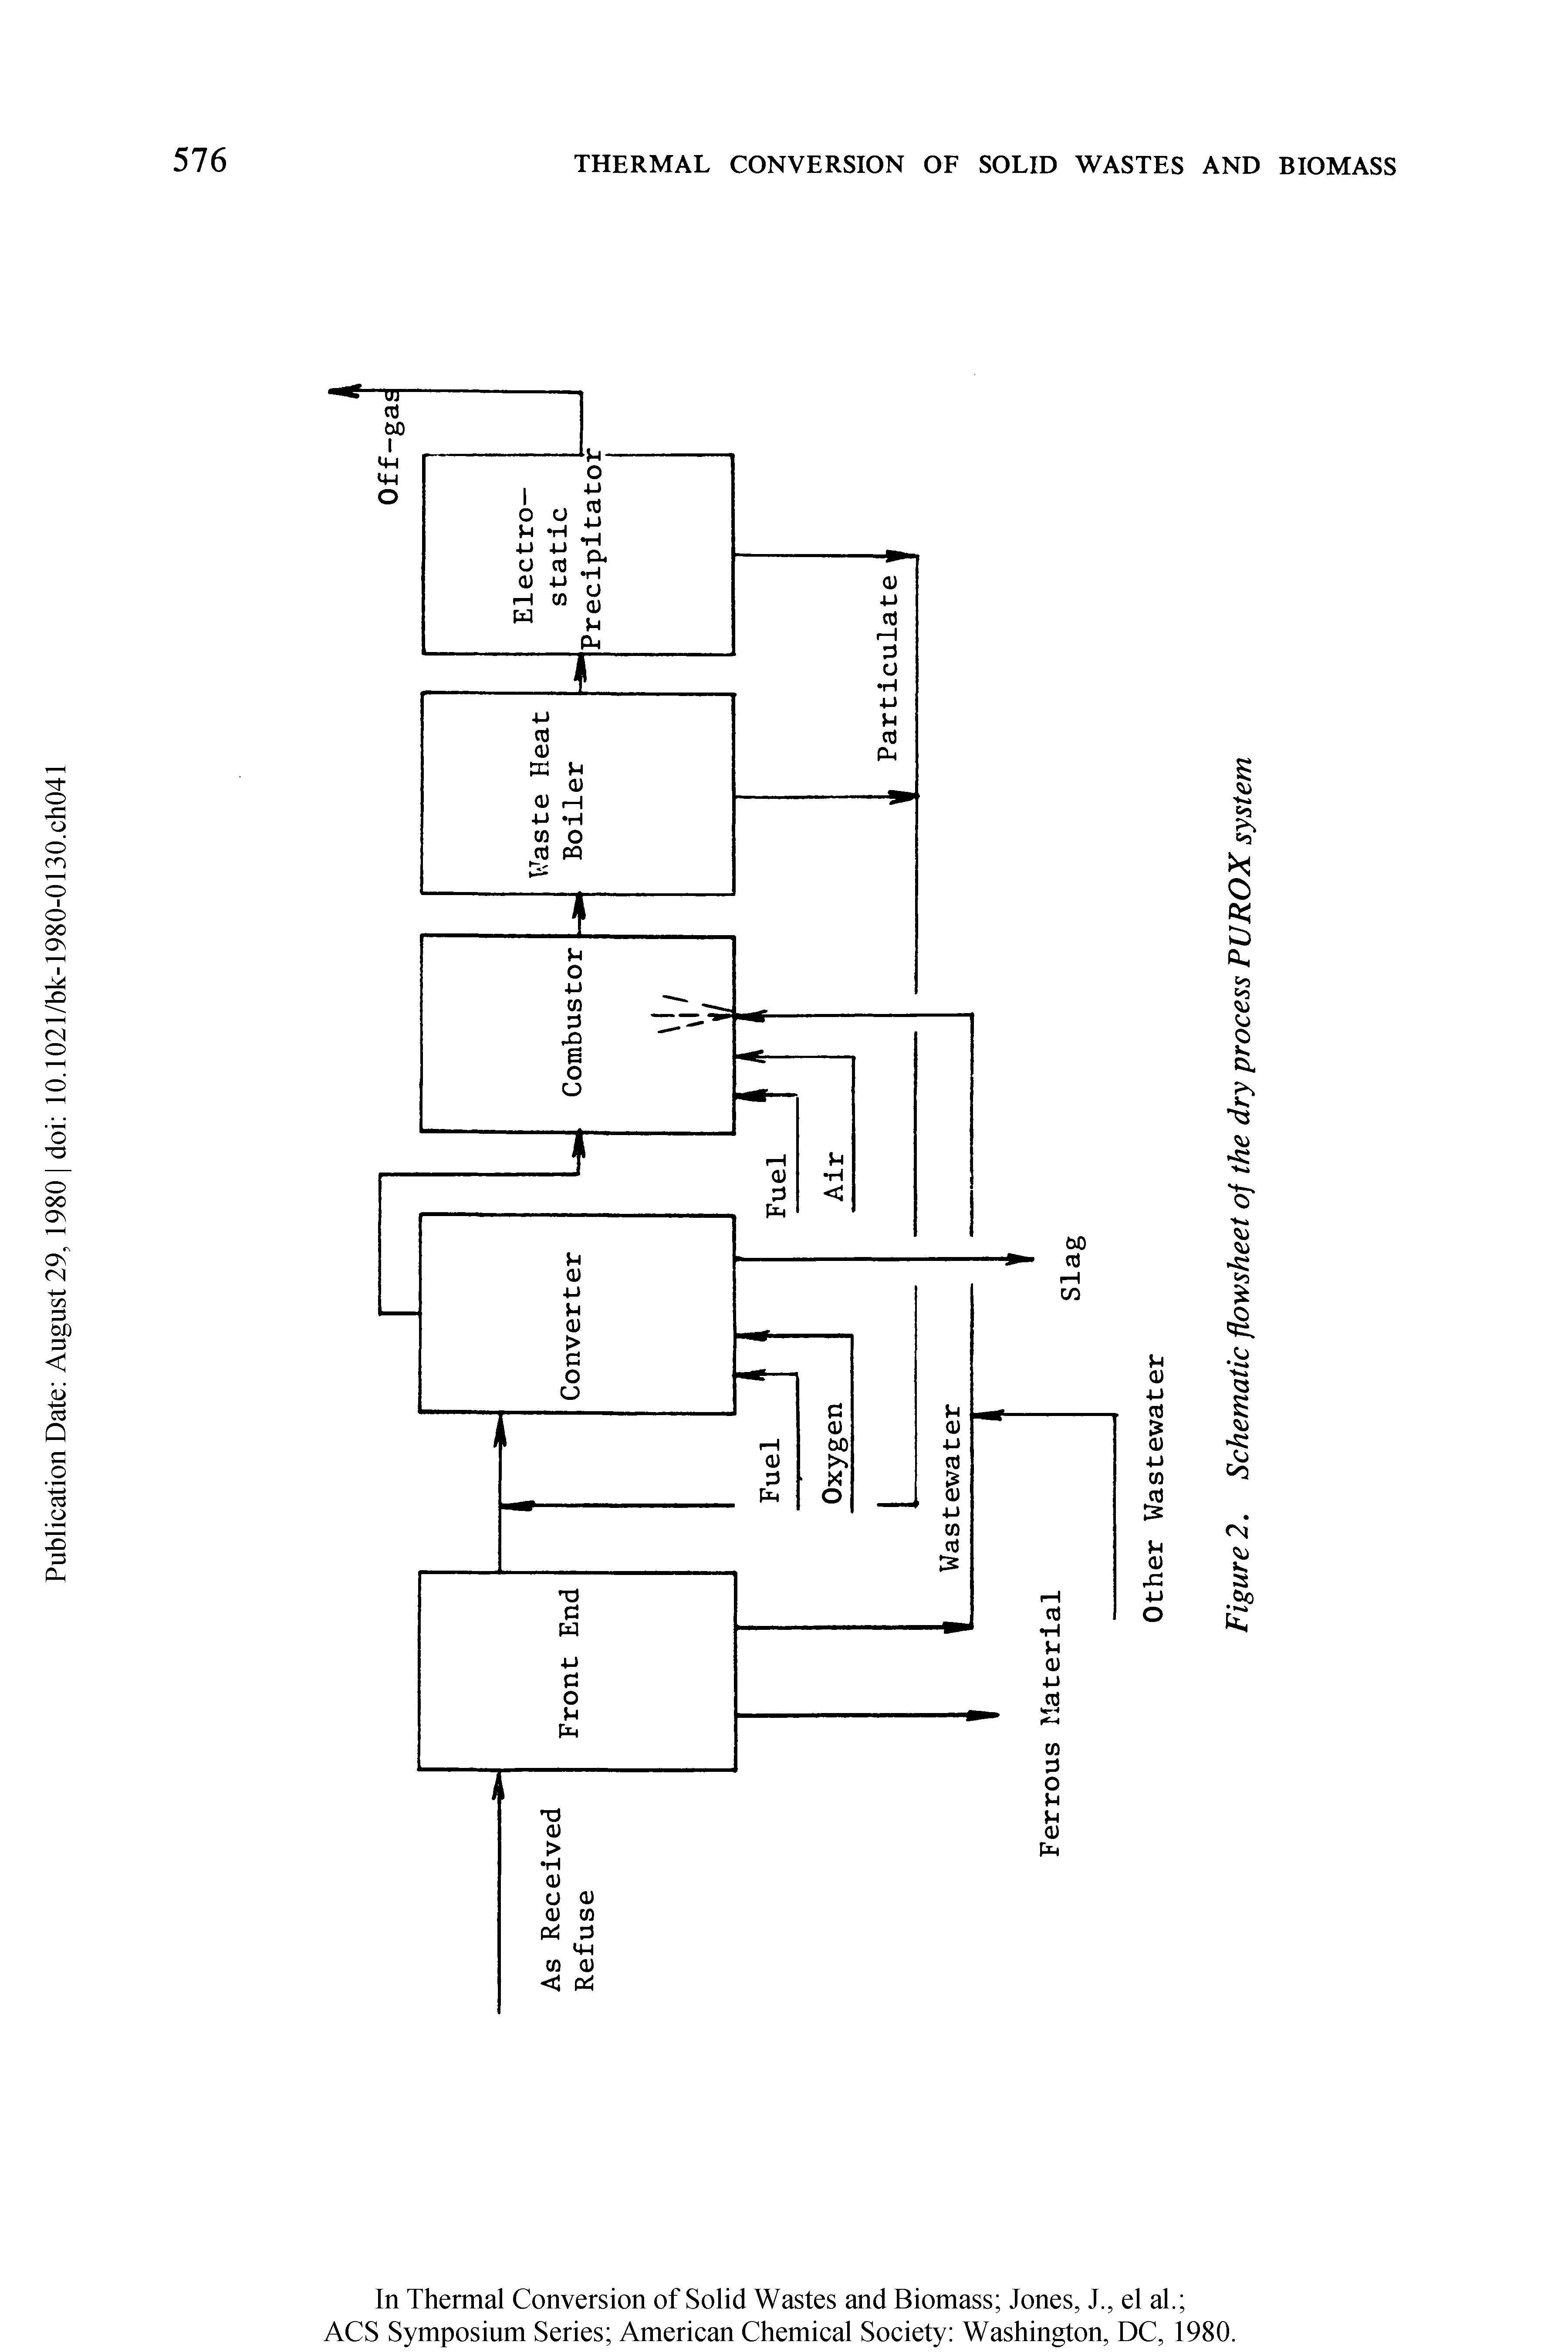 Figure 2. Schematic flowsheet of the dry process PUROX system...